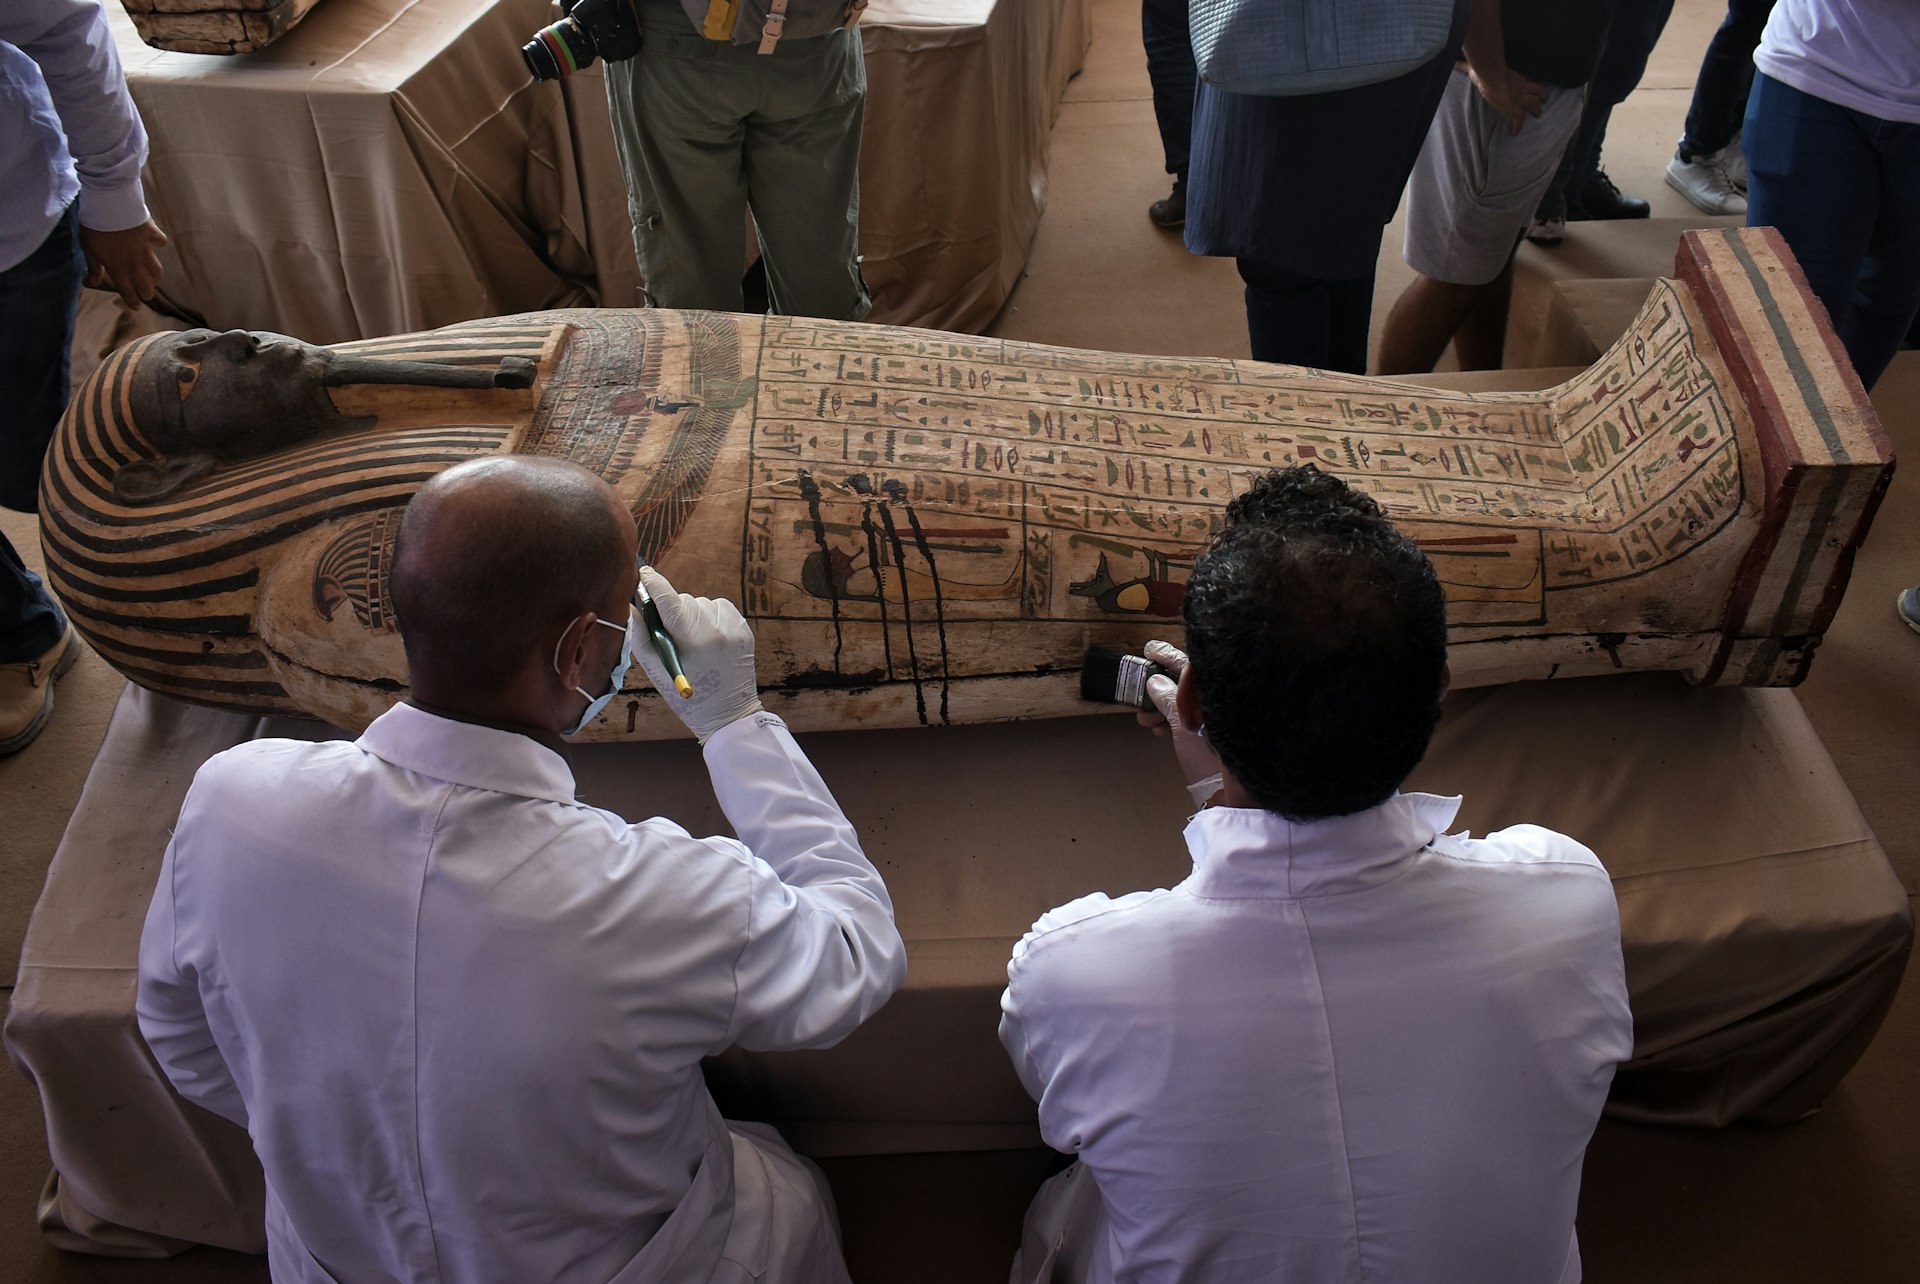 A sarcophagus was also opened during the press conference